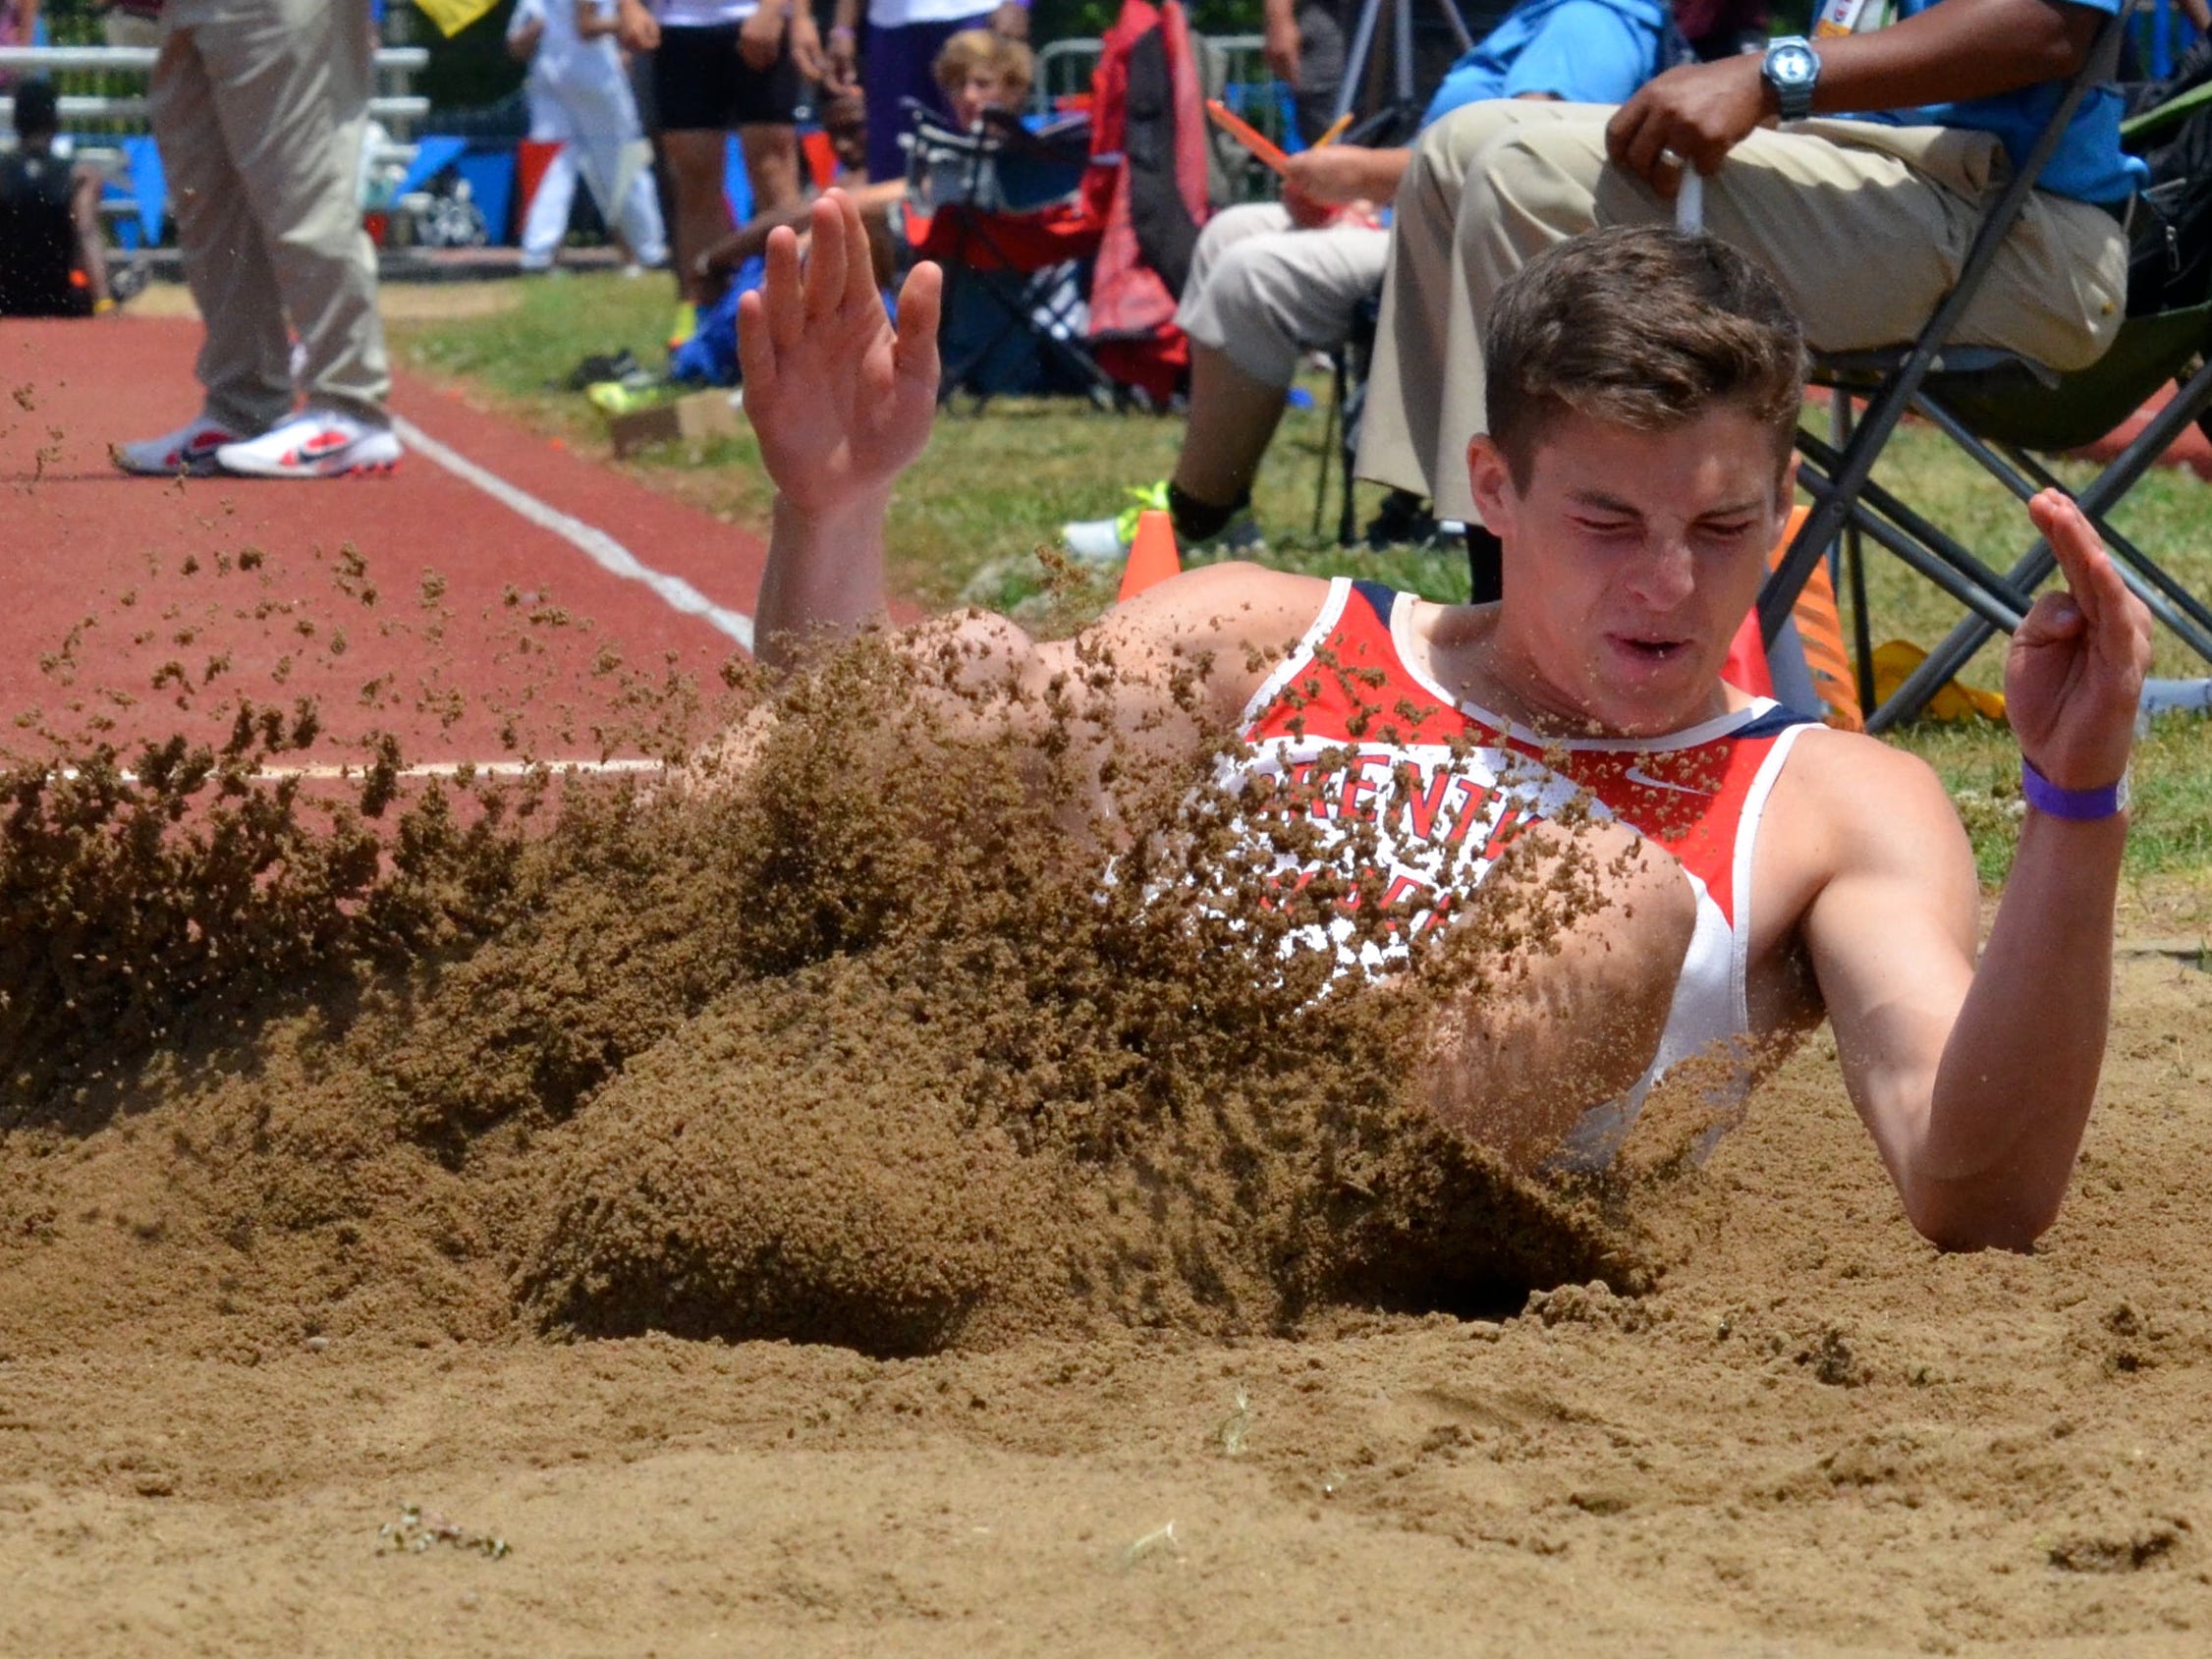 Brentwood Academy's George Patrick won five Division II events, including the long jump and triple jump on Friday.